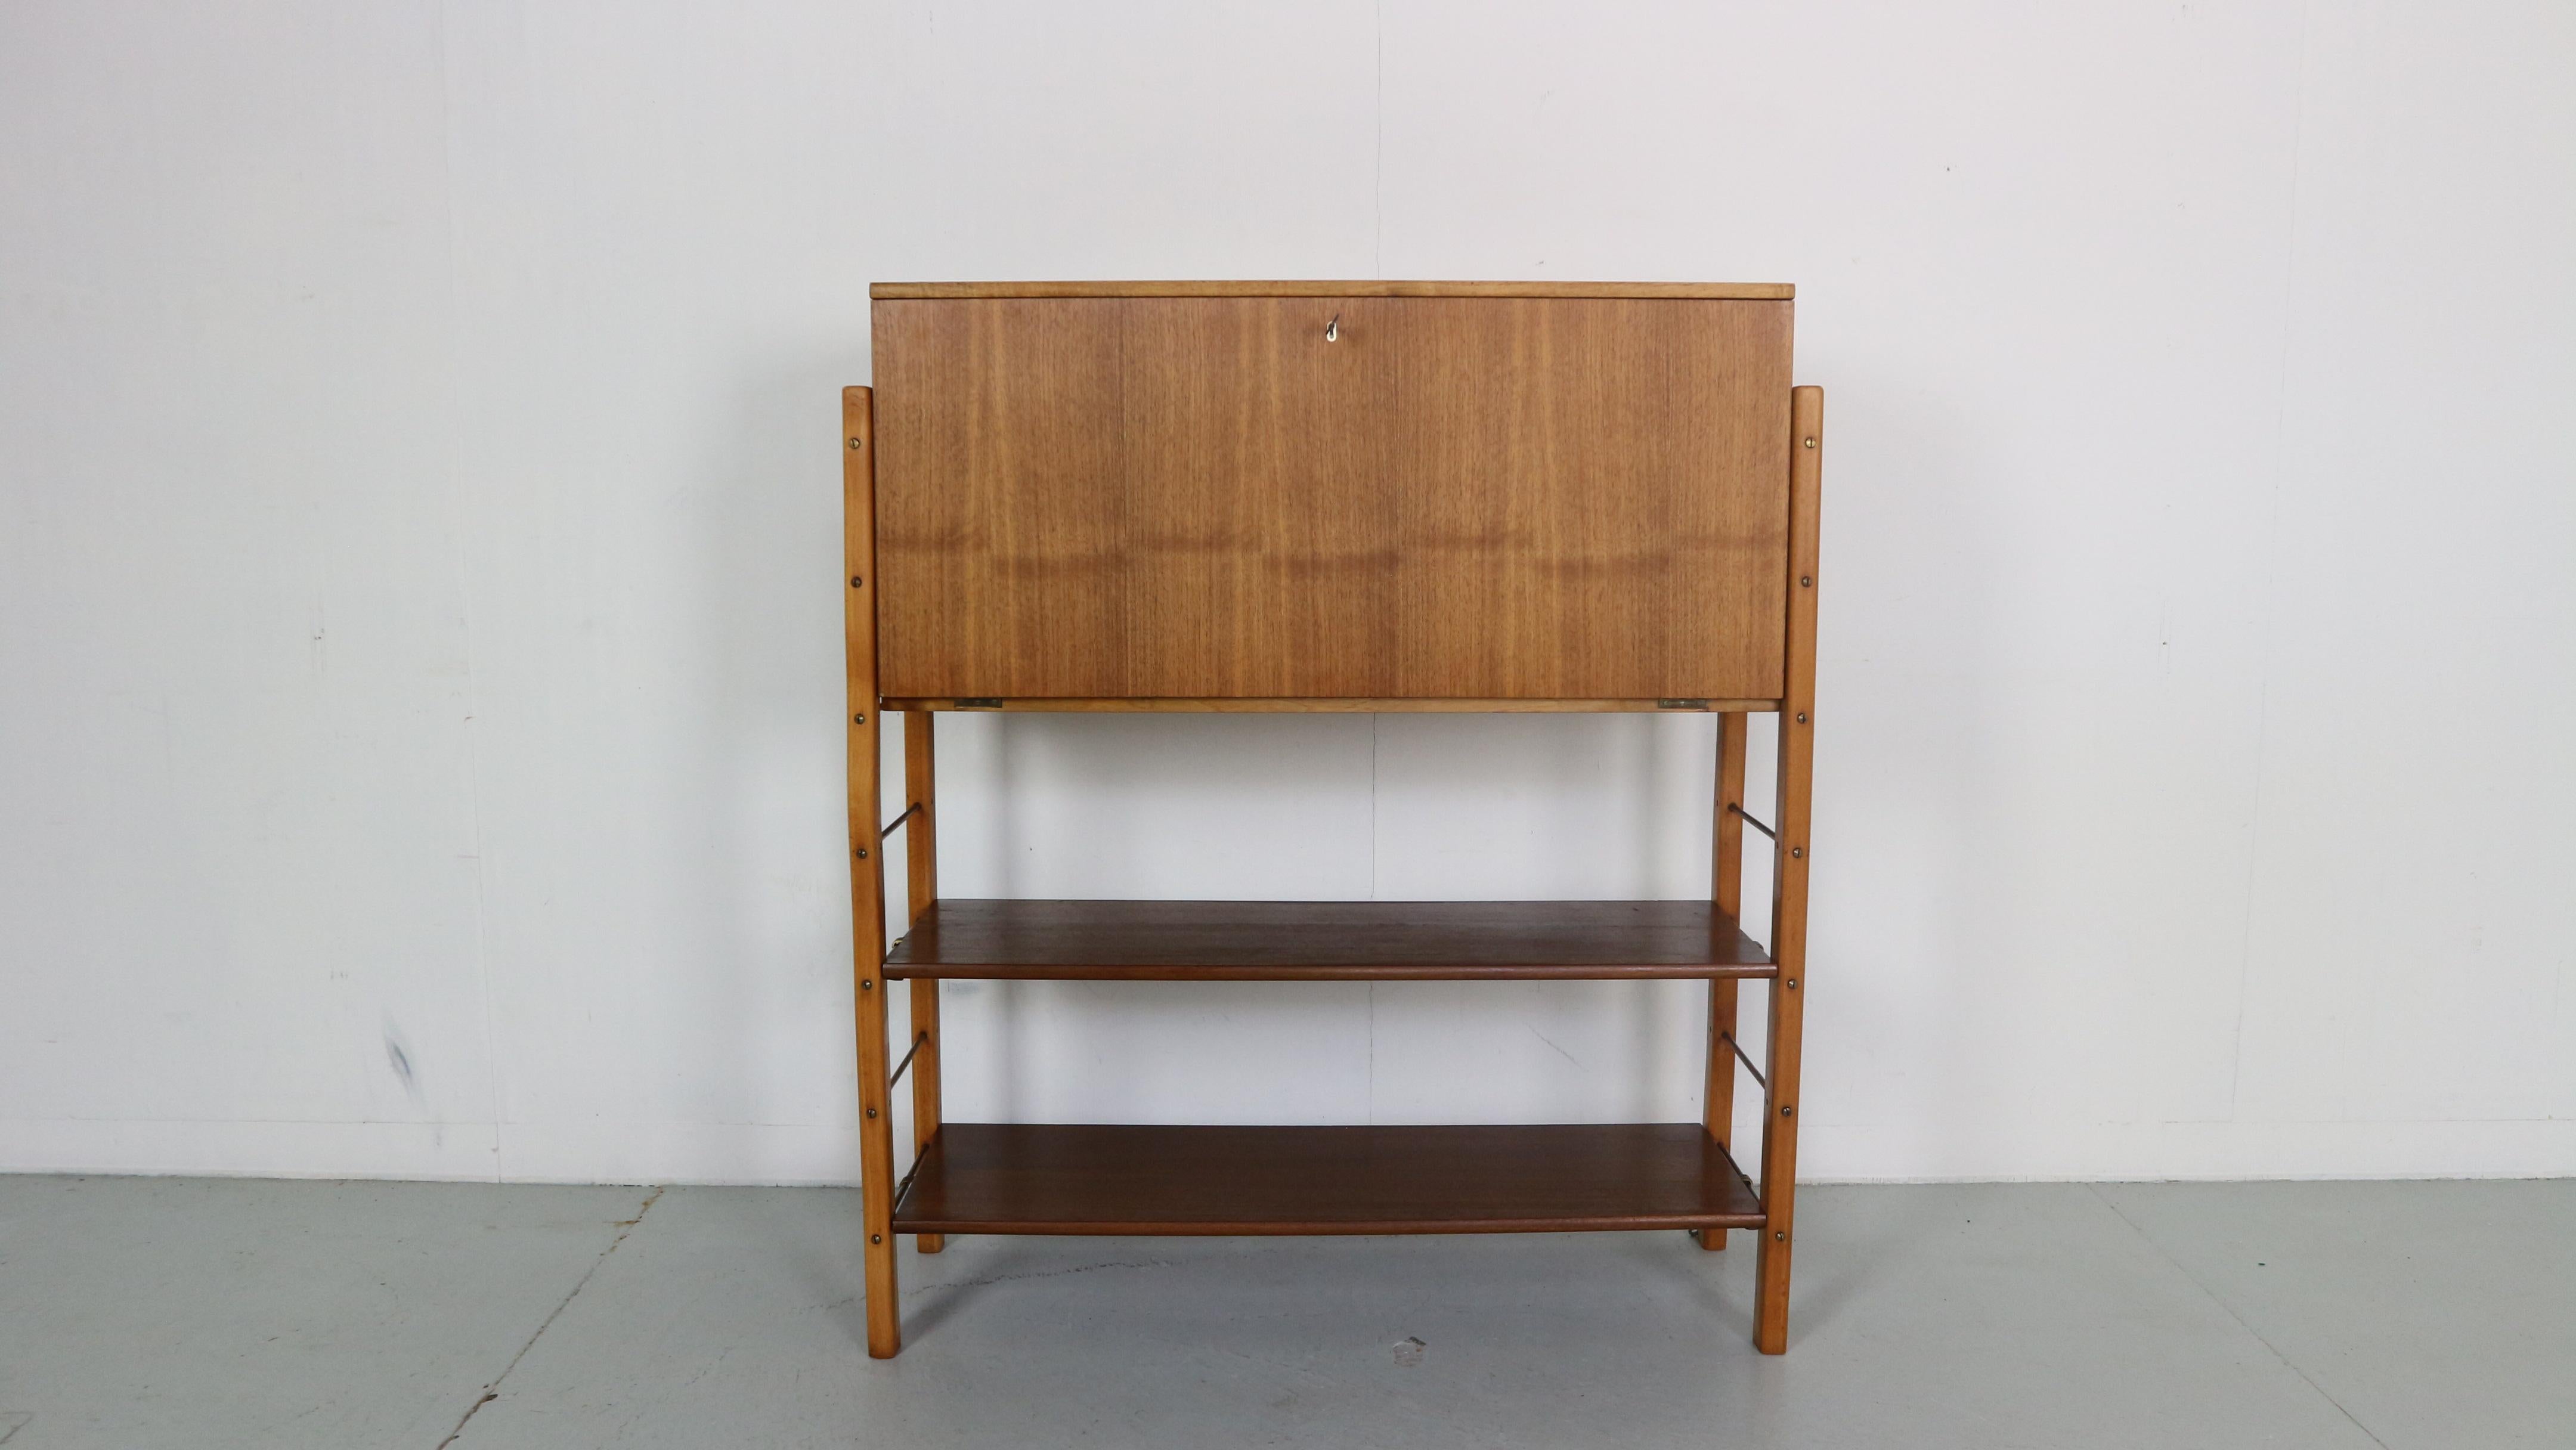 Mid- Century modern period wall system designed by William Watting for Fristho Franeker from the 1950s, Netherlands.

Free standing wall system has two shelves and a secretary cabinet.
You can place the shelves up or down depending on your own